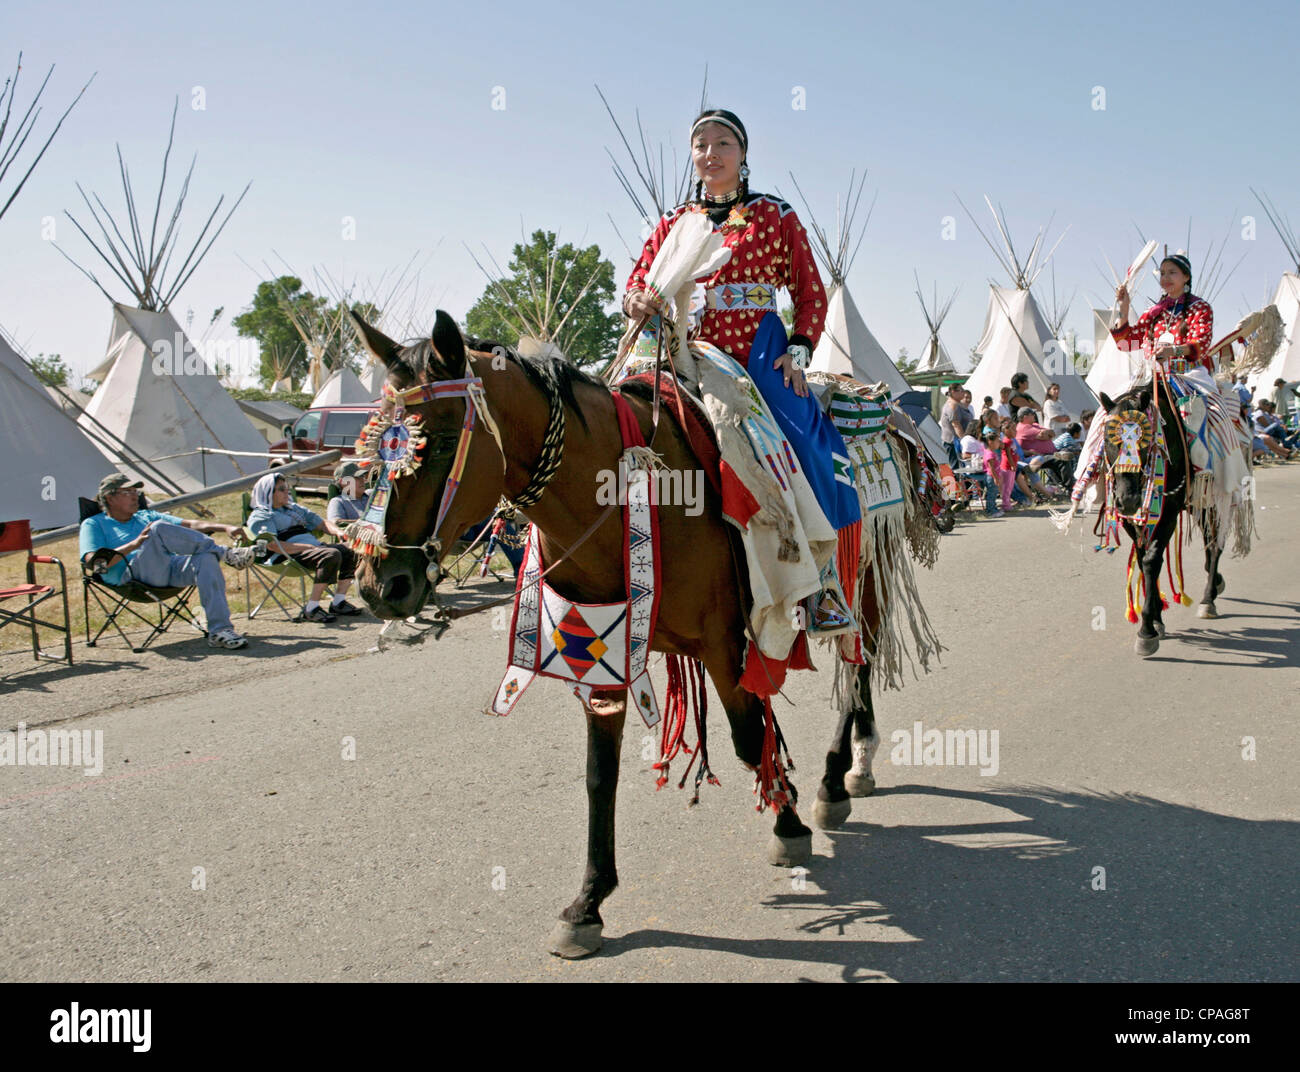 Crow fair hires stock photography and images Alamy